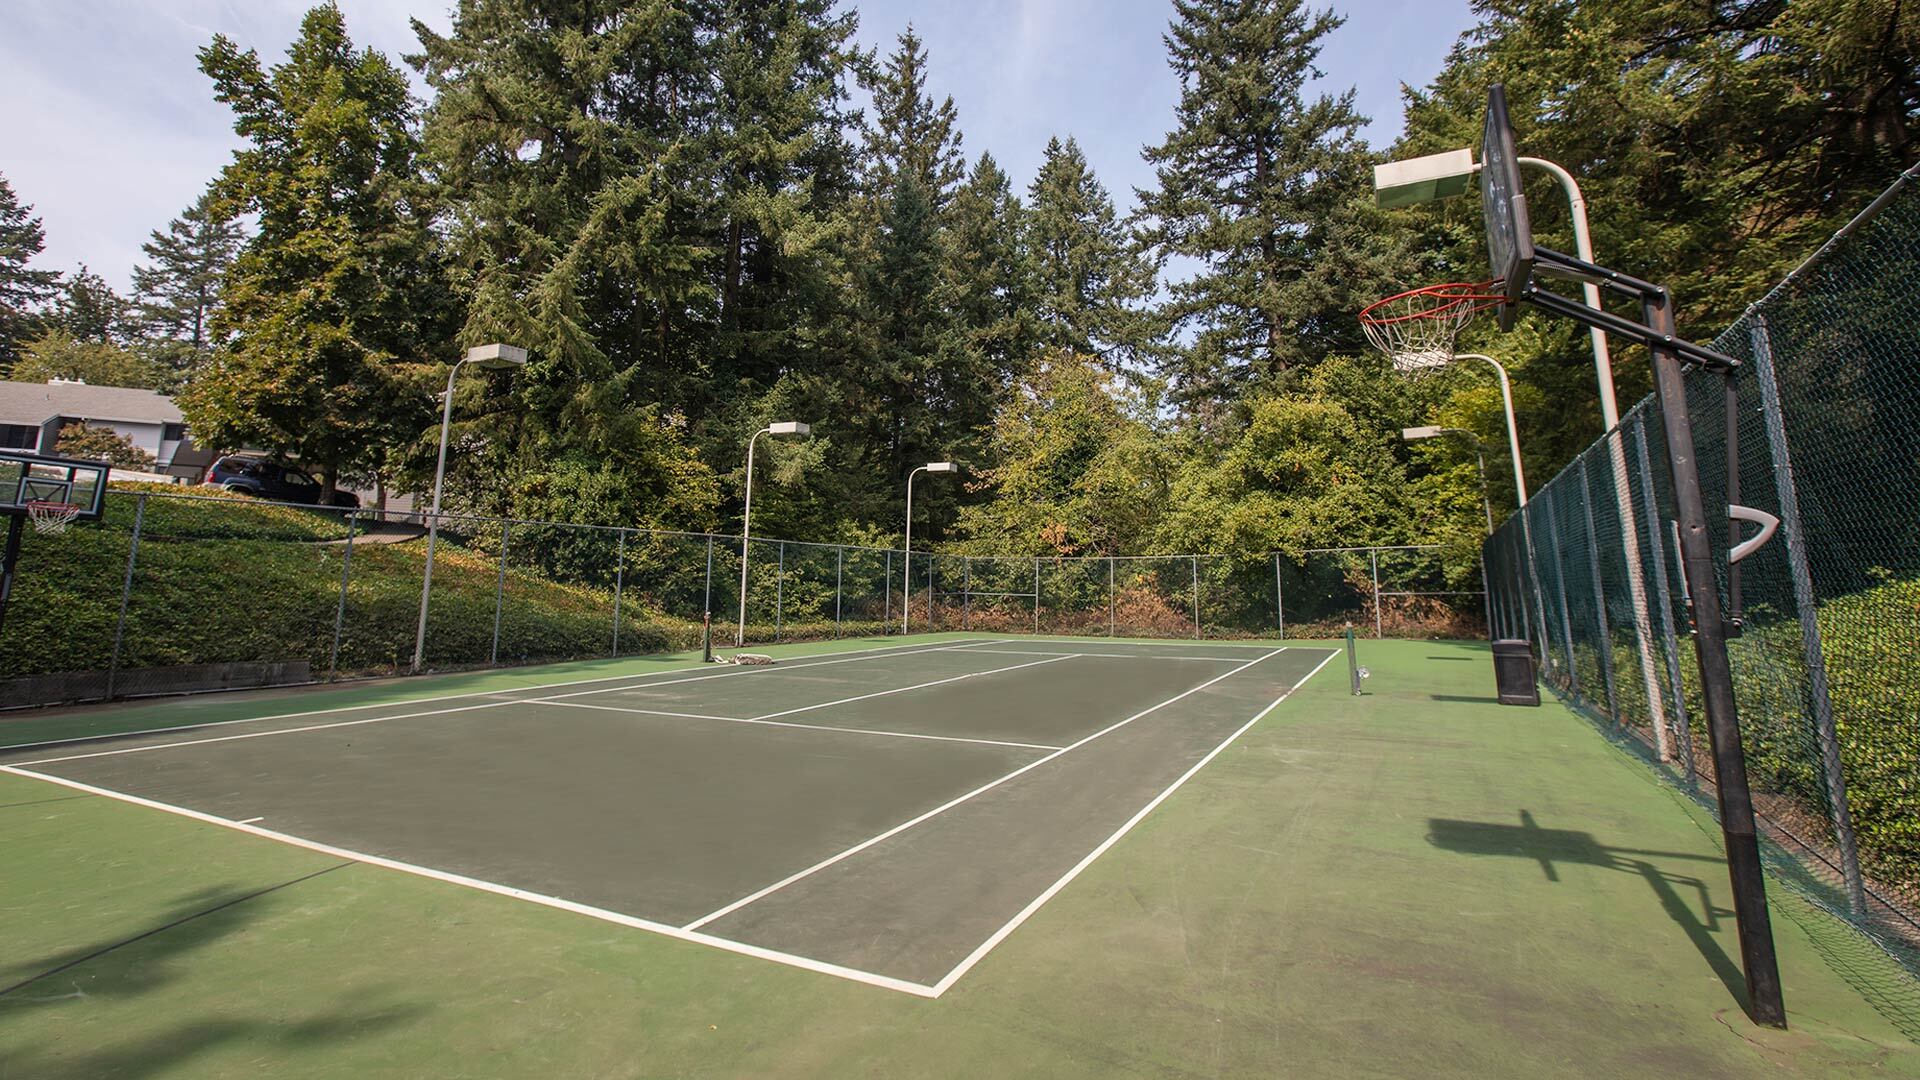 Barclay tennis court view 1